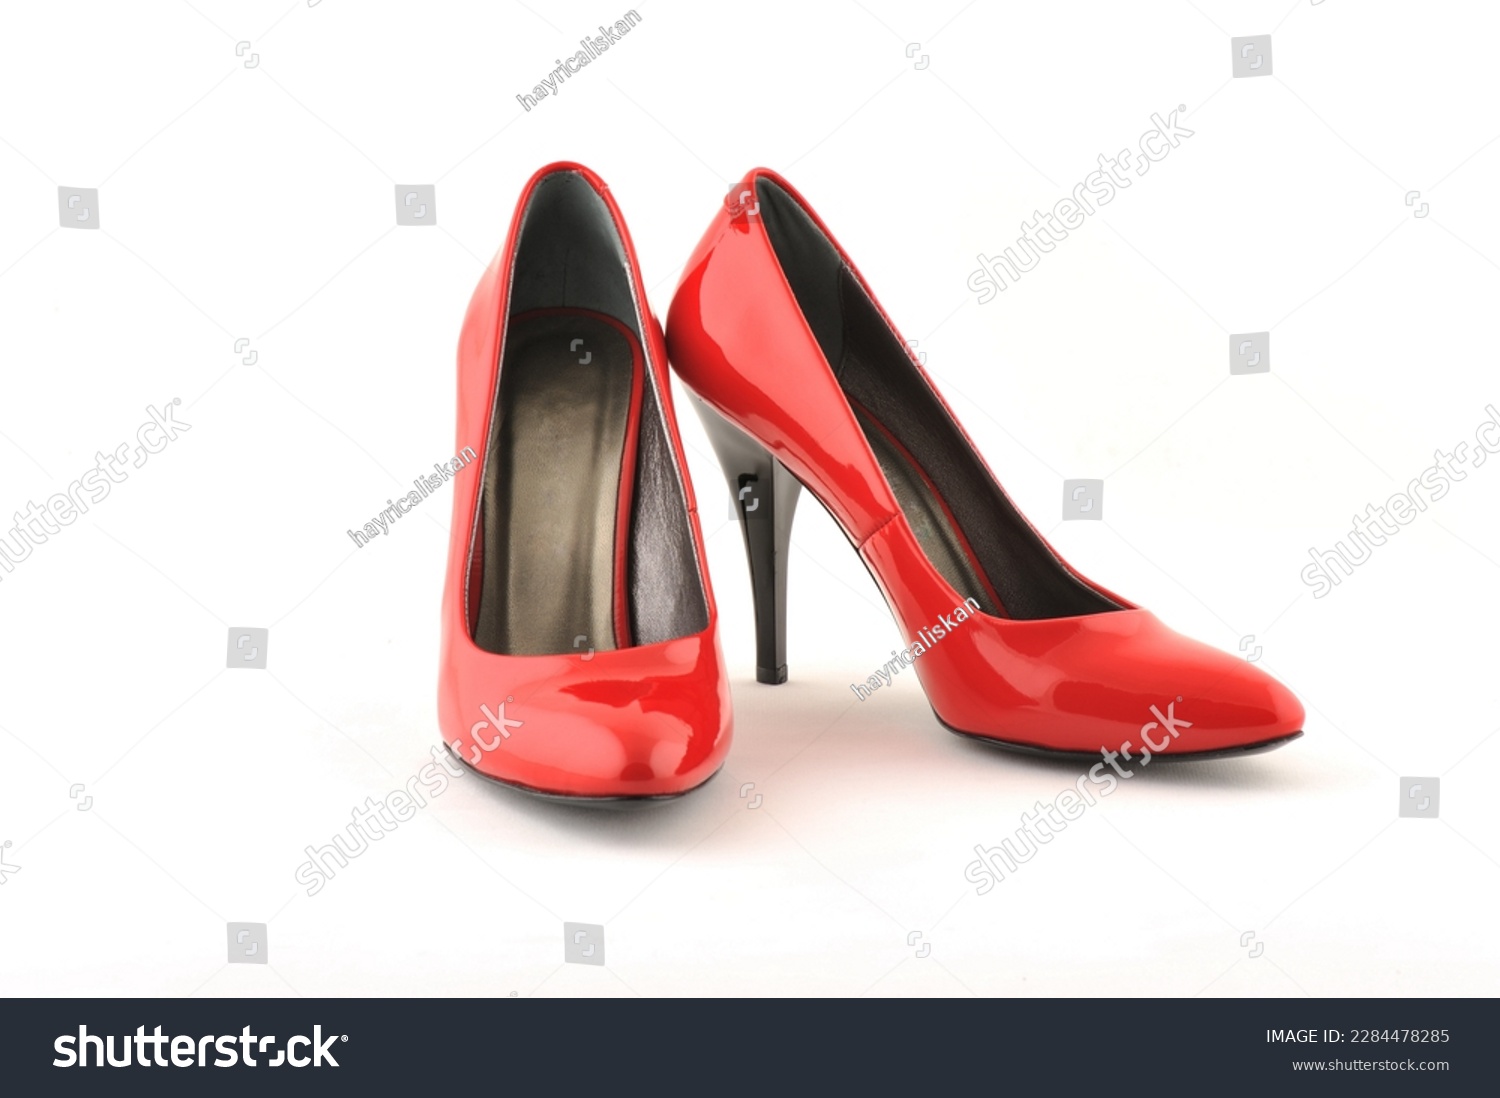 Red high heel shoes isolated on white background, clipping path included. #2284478285